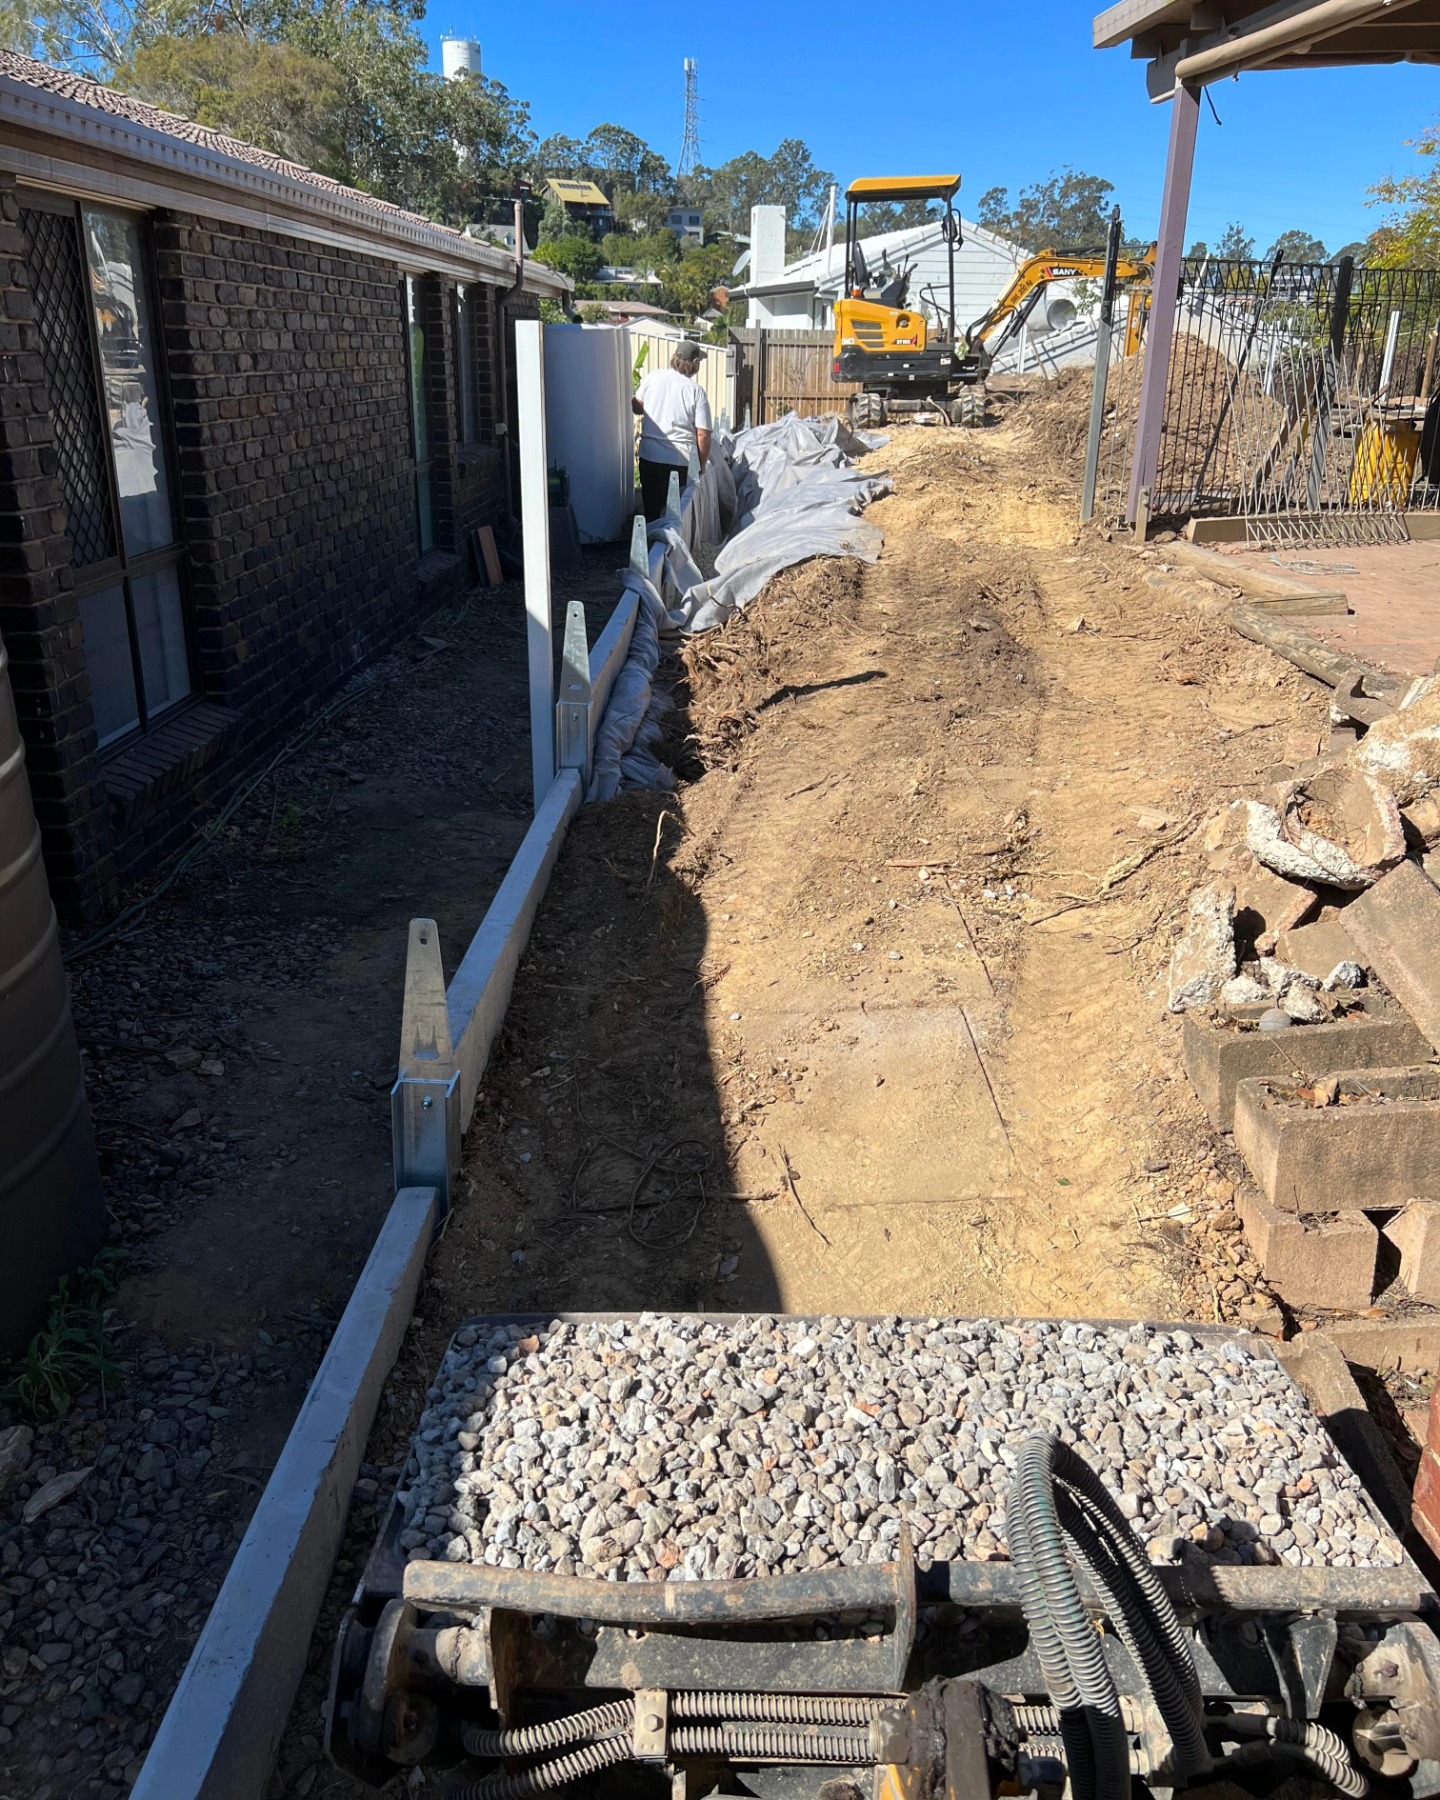 Persistence Pays Off
In the third step of our journey, persistence becomes our ally. We’ve managed to clear a significant portion of the area. This achievement paves the way for the retaining wall’s foundation.